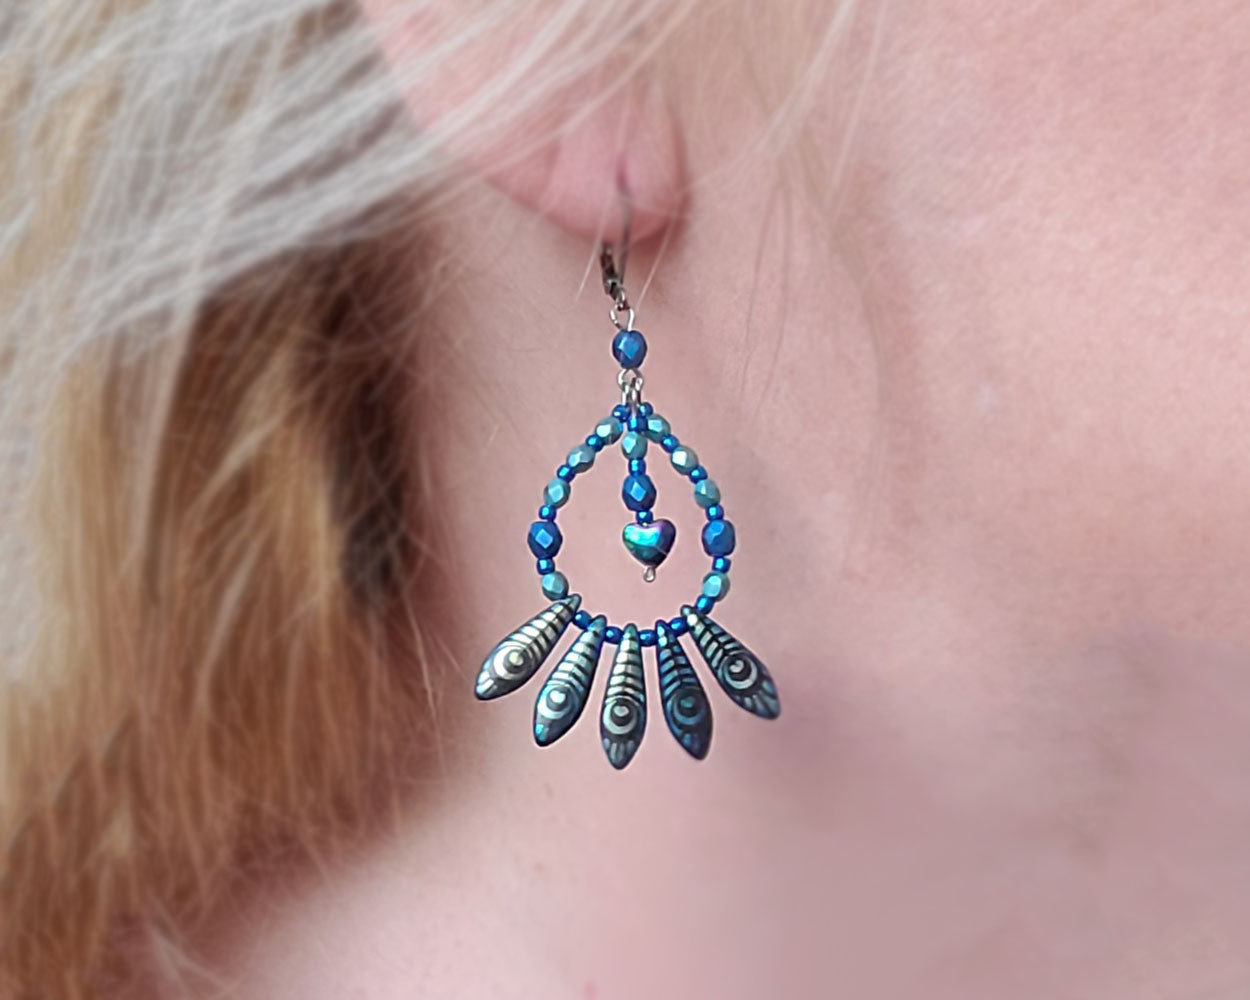 Long Dangling Hoop Fan Earrings with five peacock feather fanning the base of a drop shaped hoop made with stunning blue glass beads and a dangling titanium electroplated Hemalike heart. 